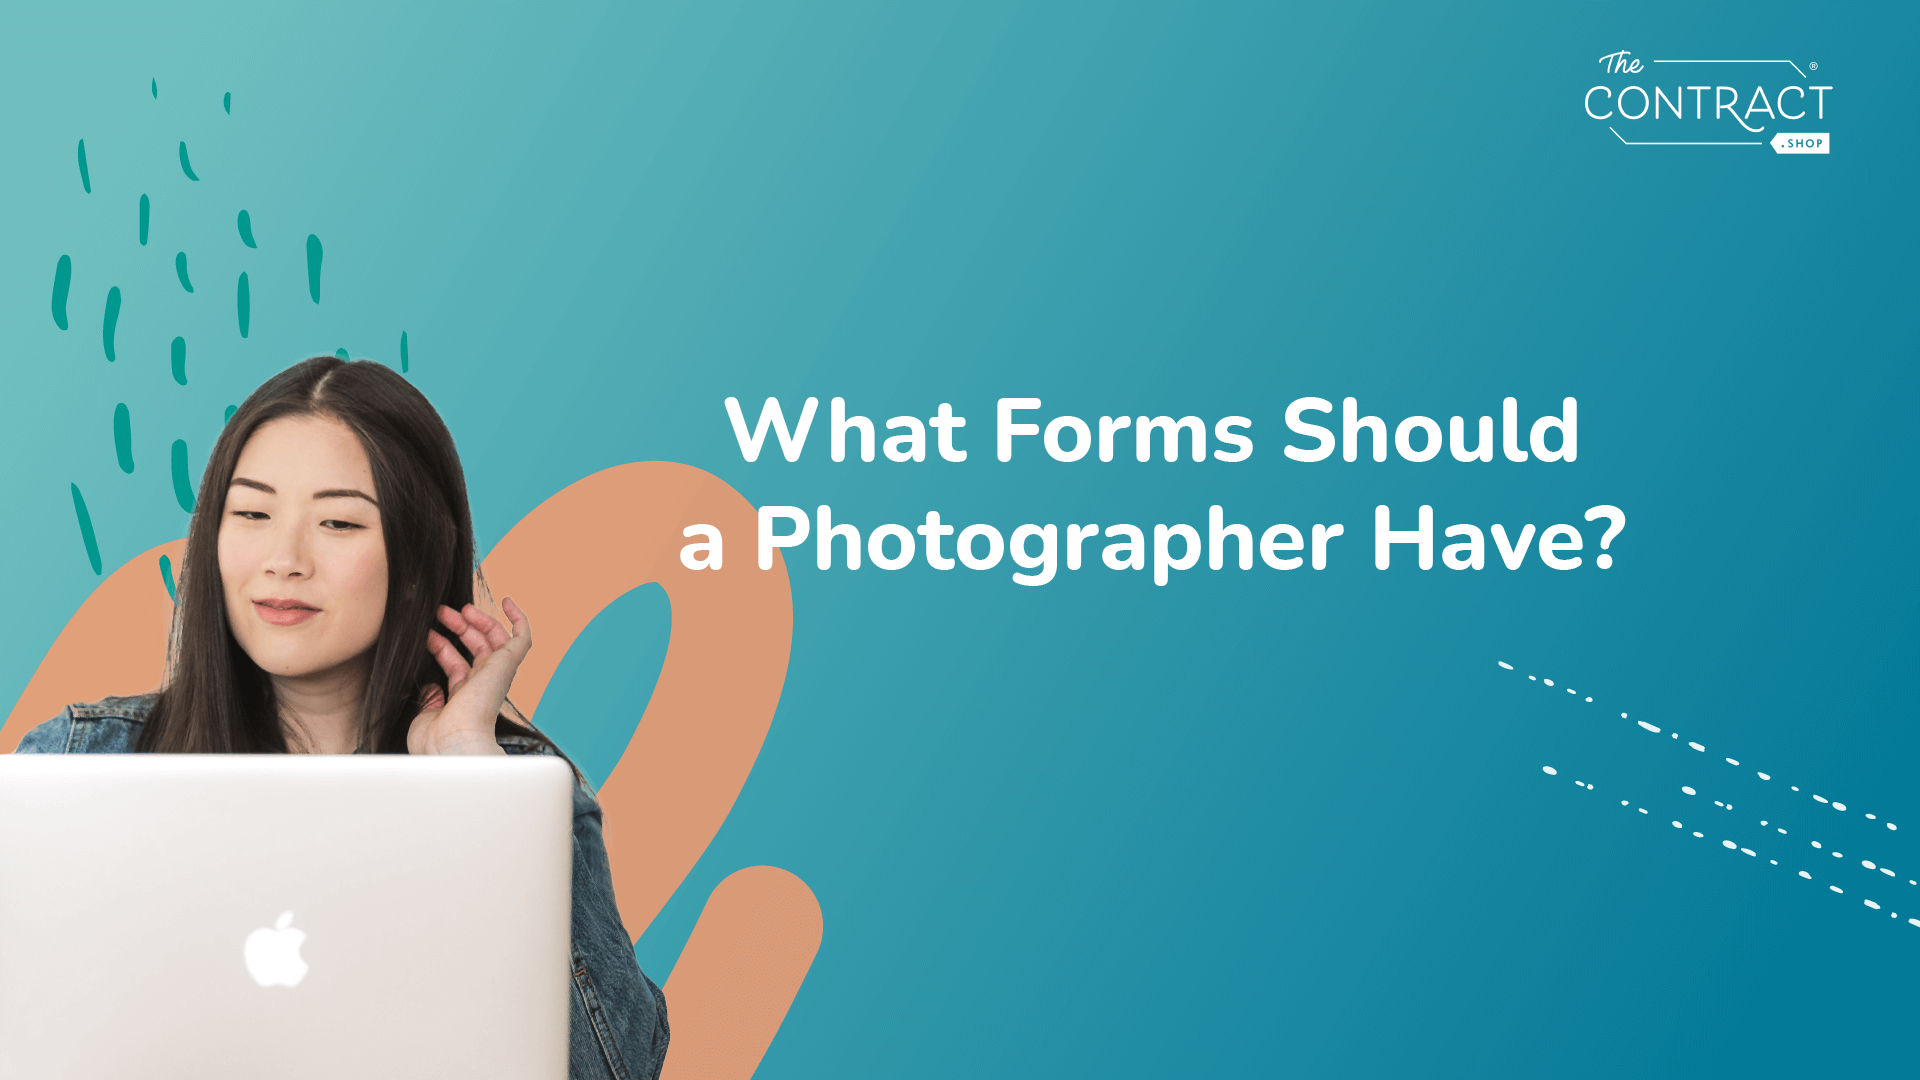 What Forms Should a Photographer Have?